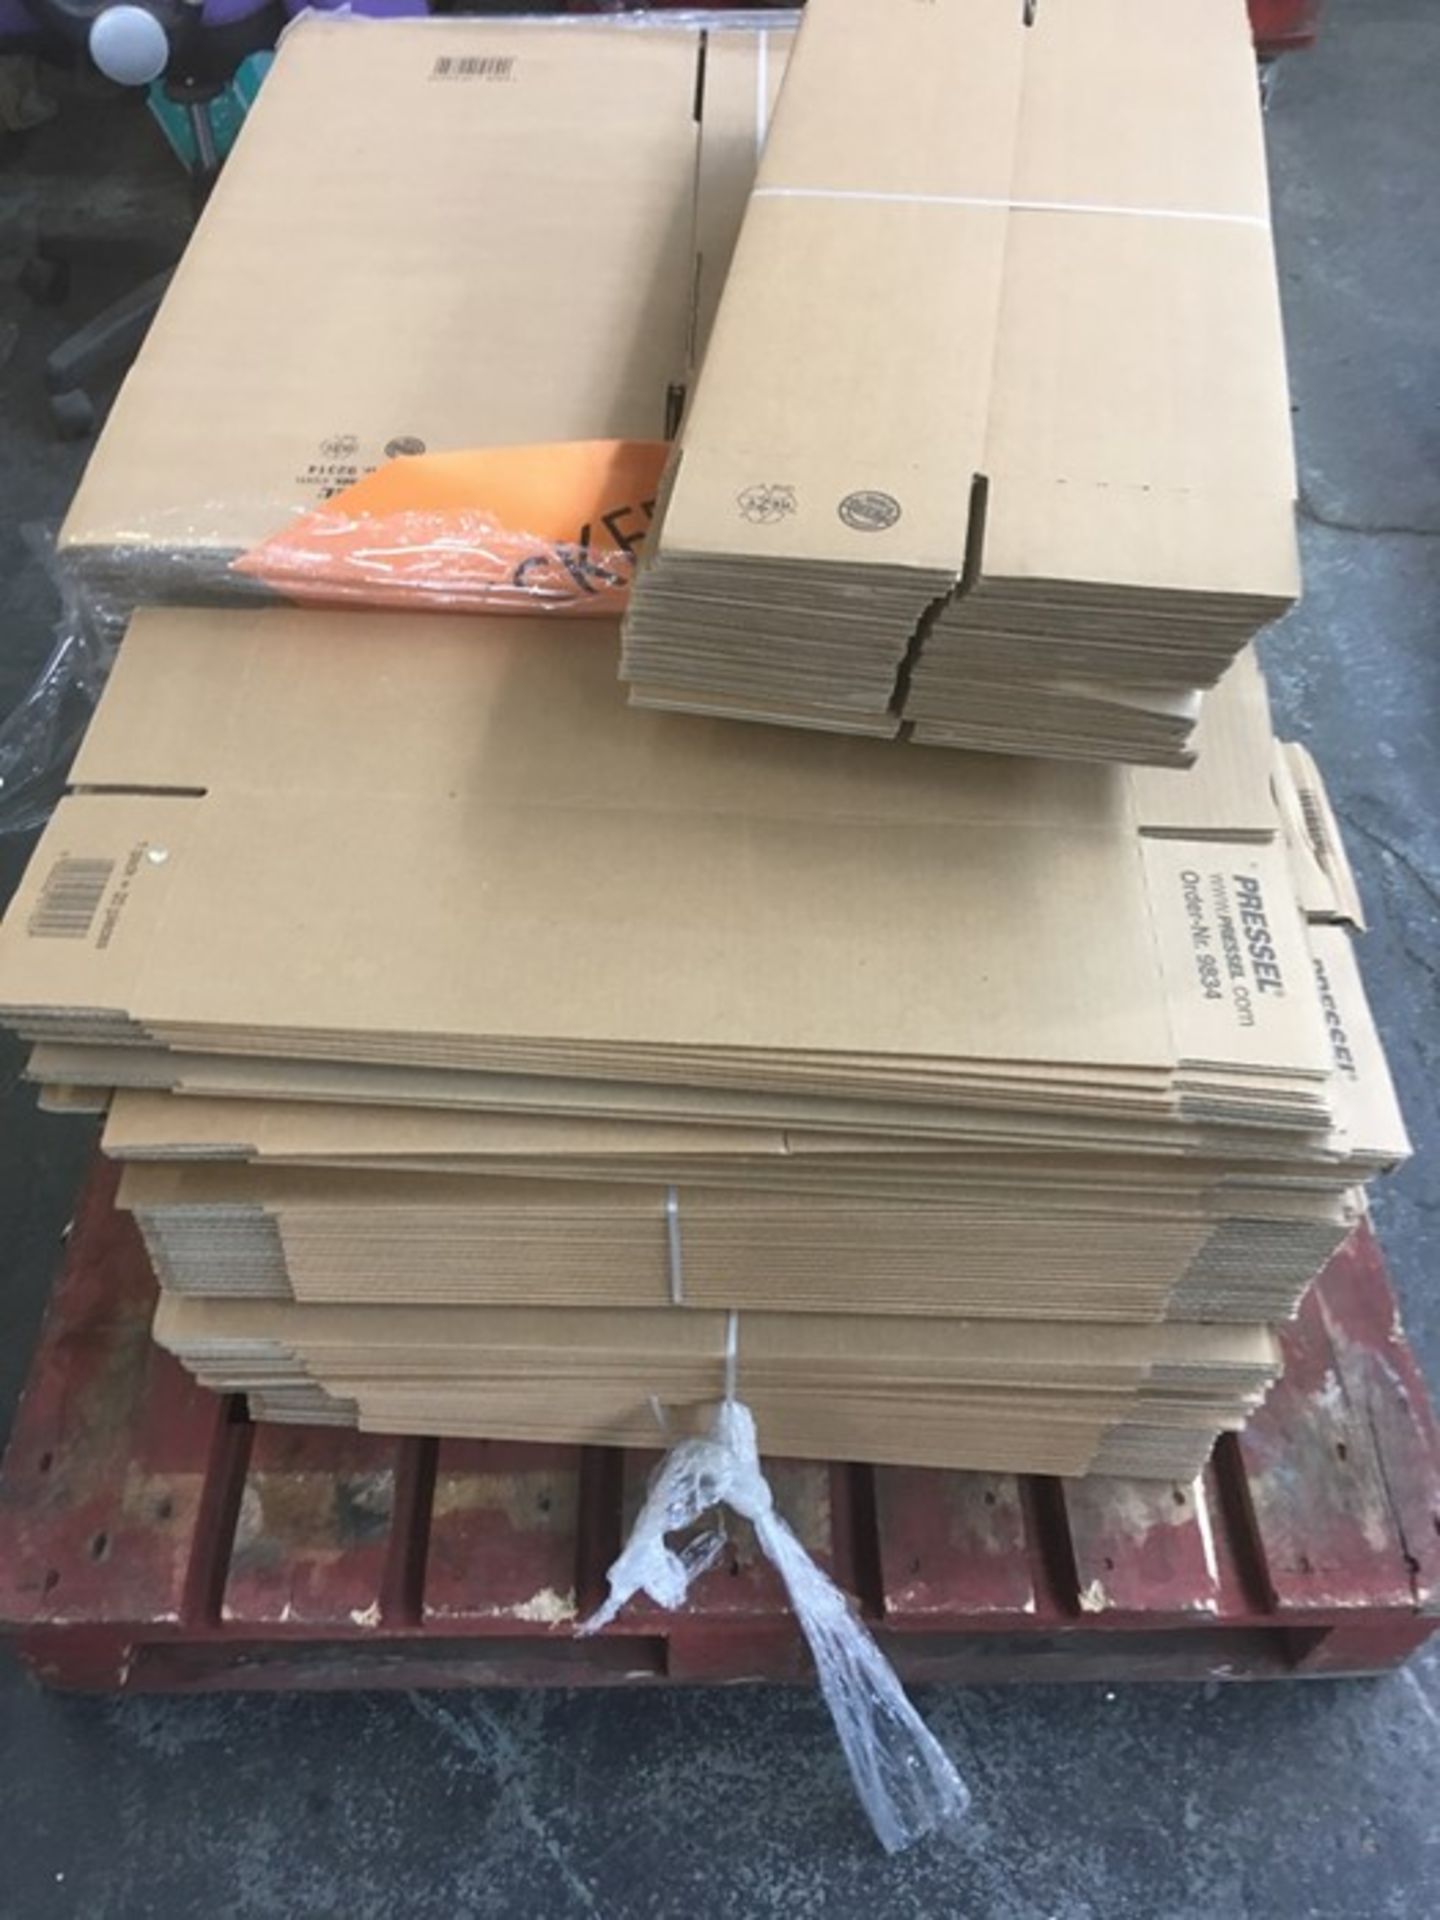 1 LOT TO CONTAIN ASSORTED CARDBOARD BOXES / COLOURS, CONDITIONS AND SIZES VARY / PN - NPN (PUBLIC